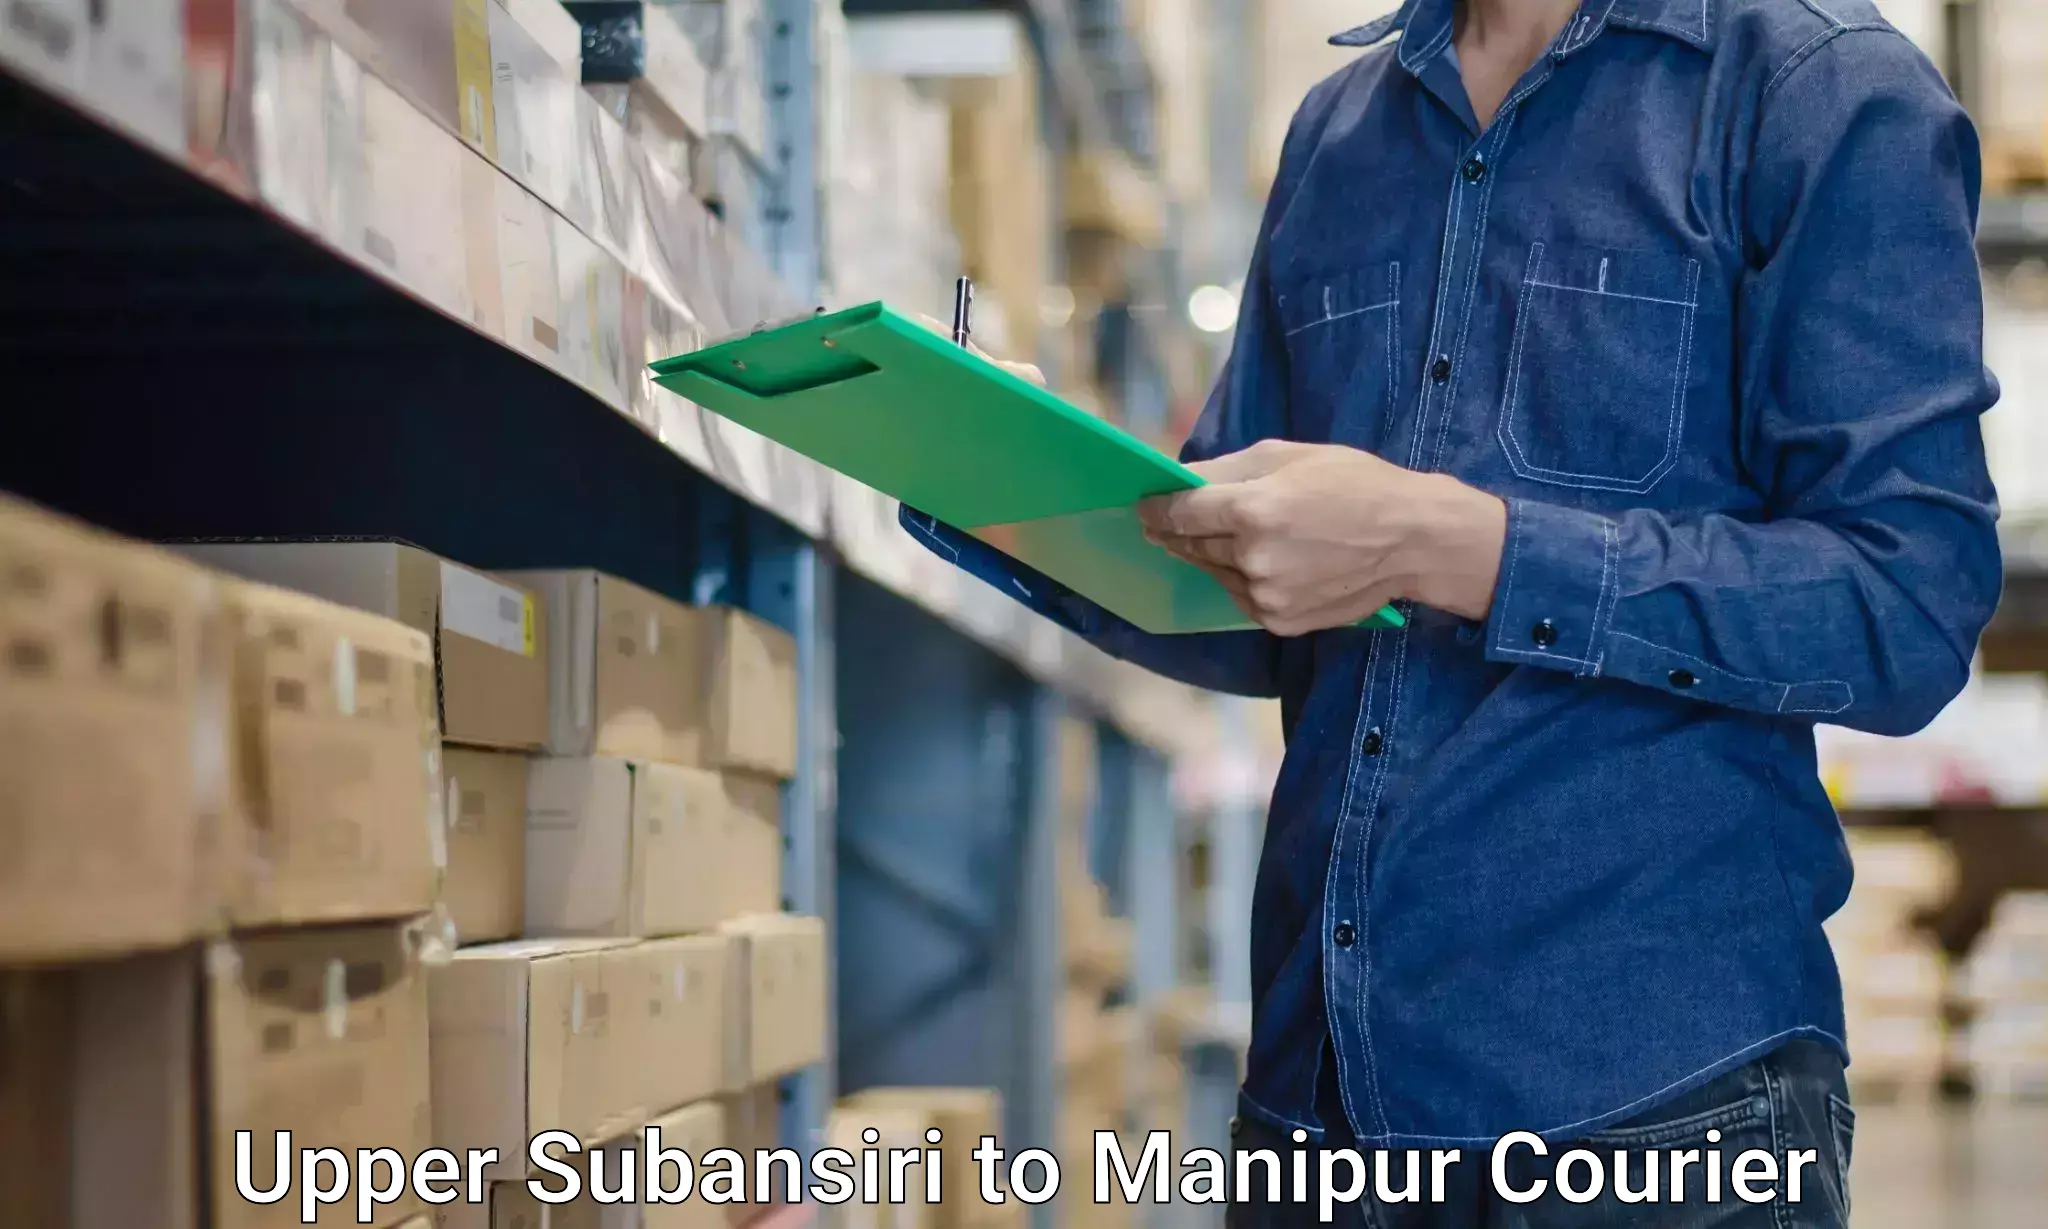 Professional movers and packers Upper Subansiri to Manipur